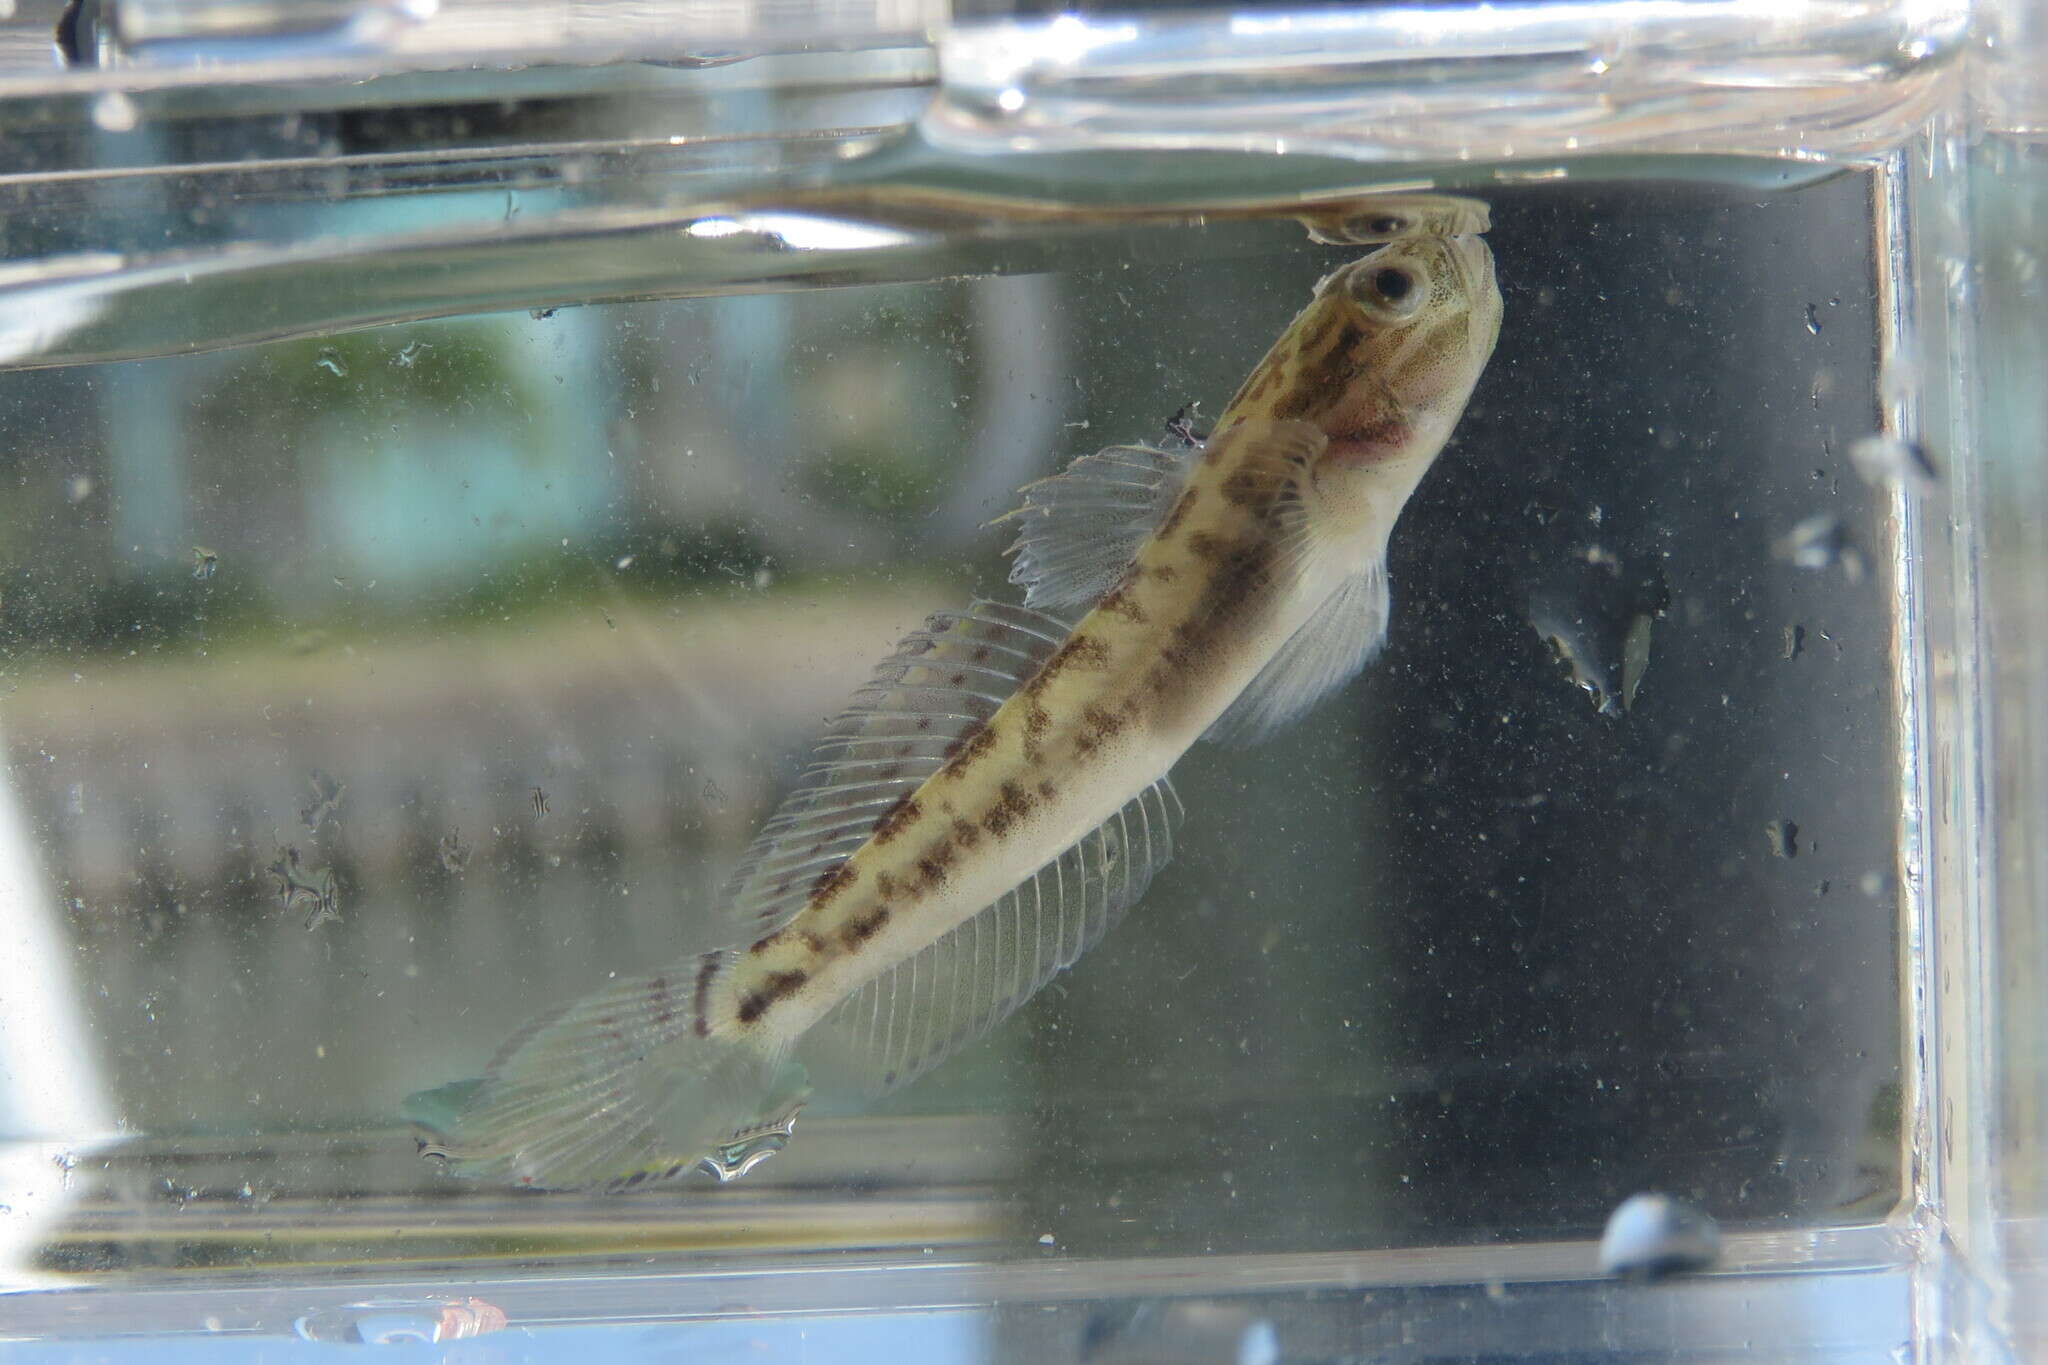 Image of Clown goby